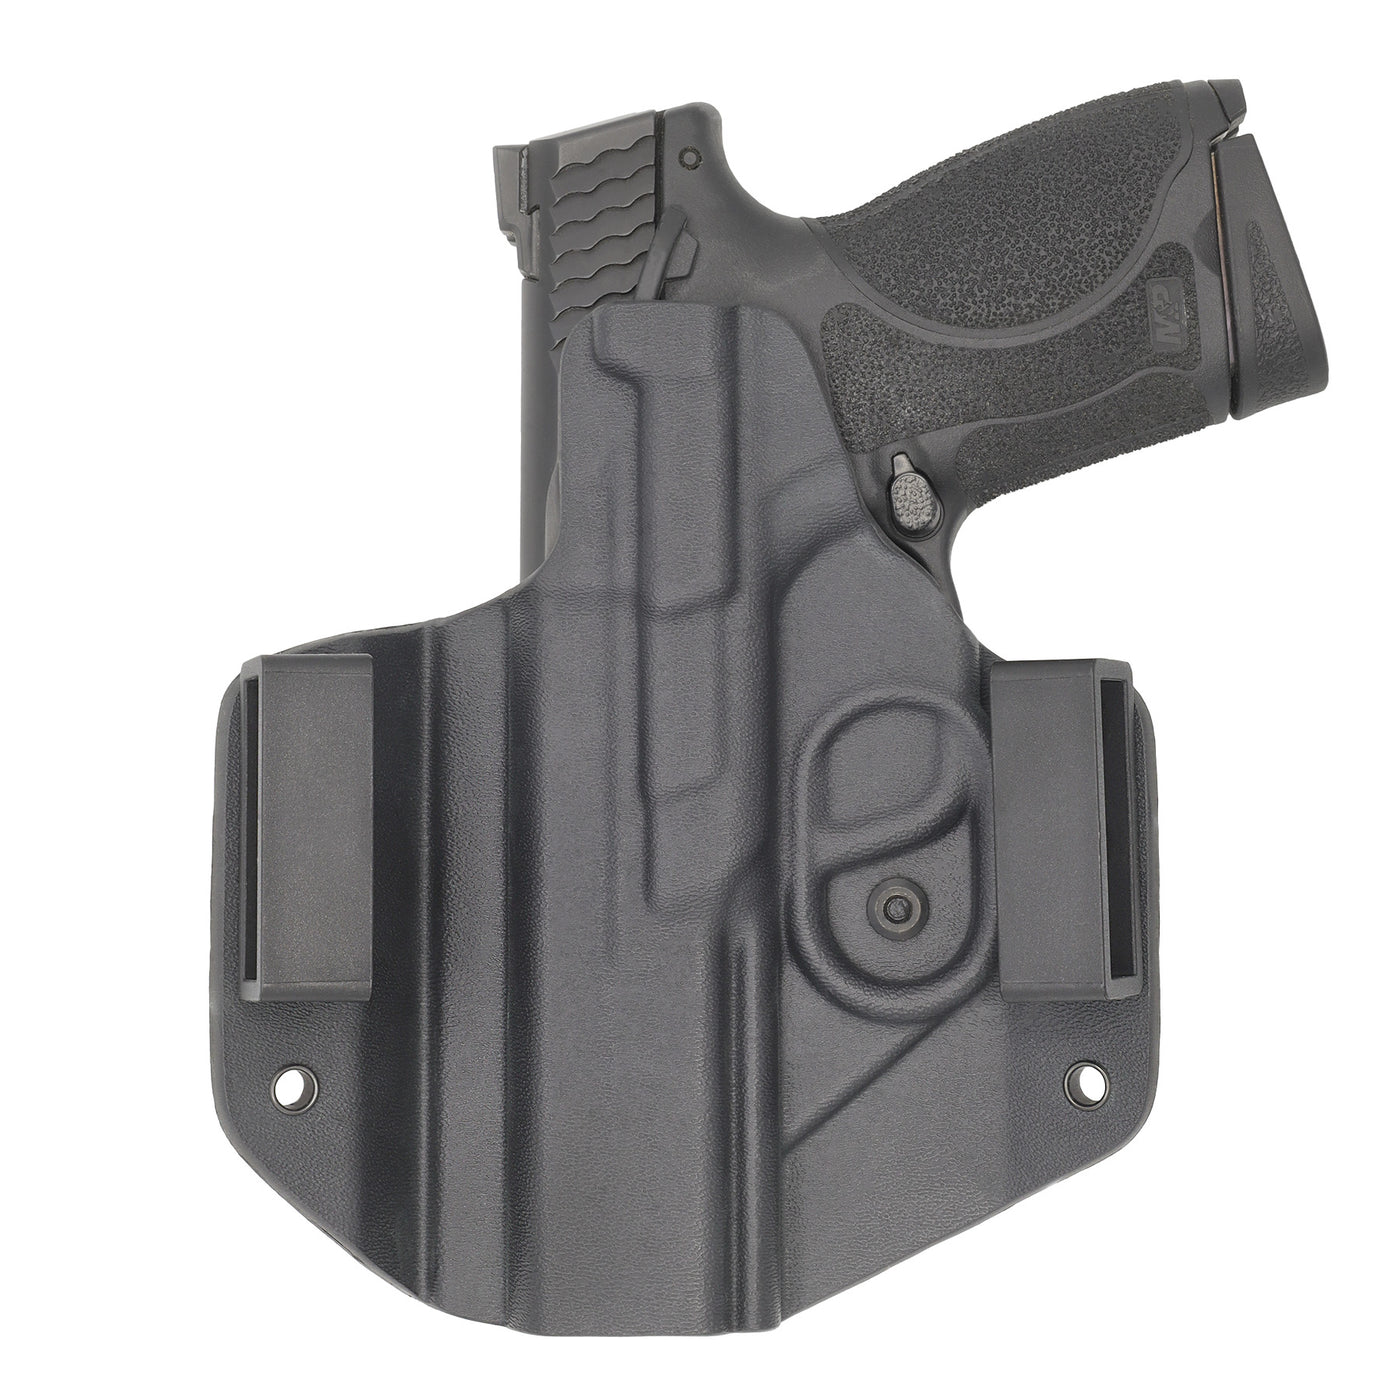 C&G Holsters custom OWB Covert S&W M&P 10/45 4.6" in holstered position back view